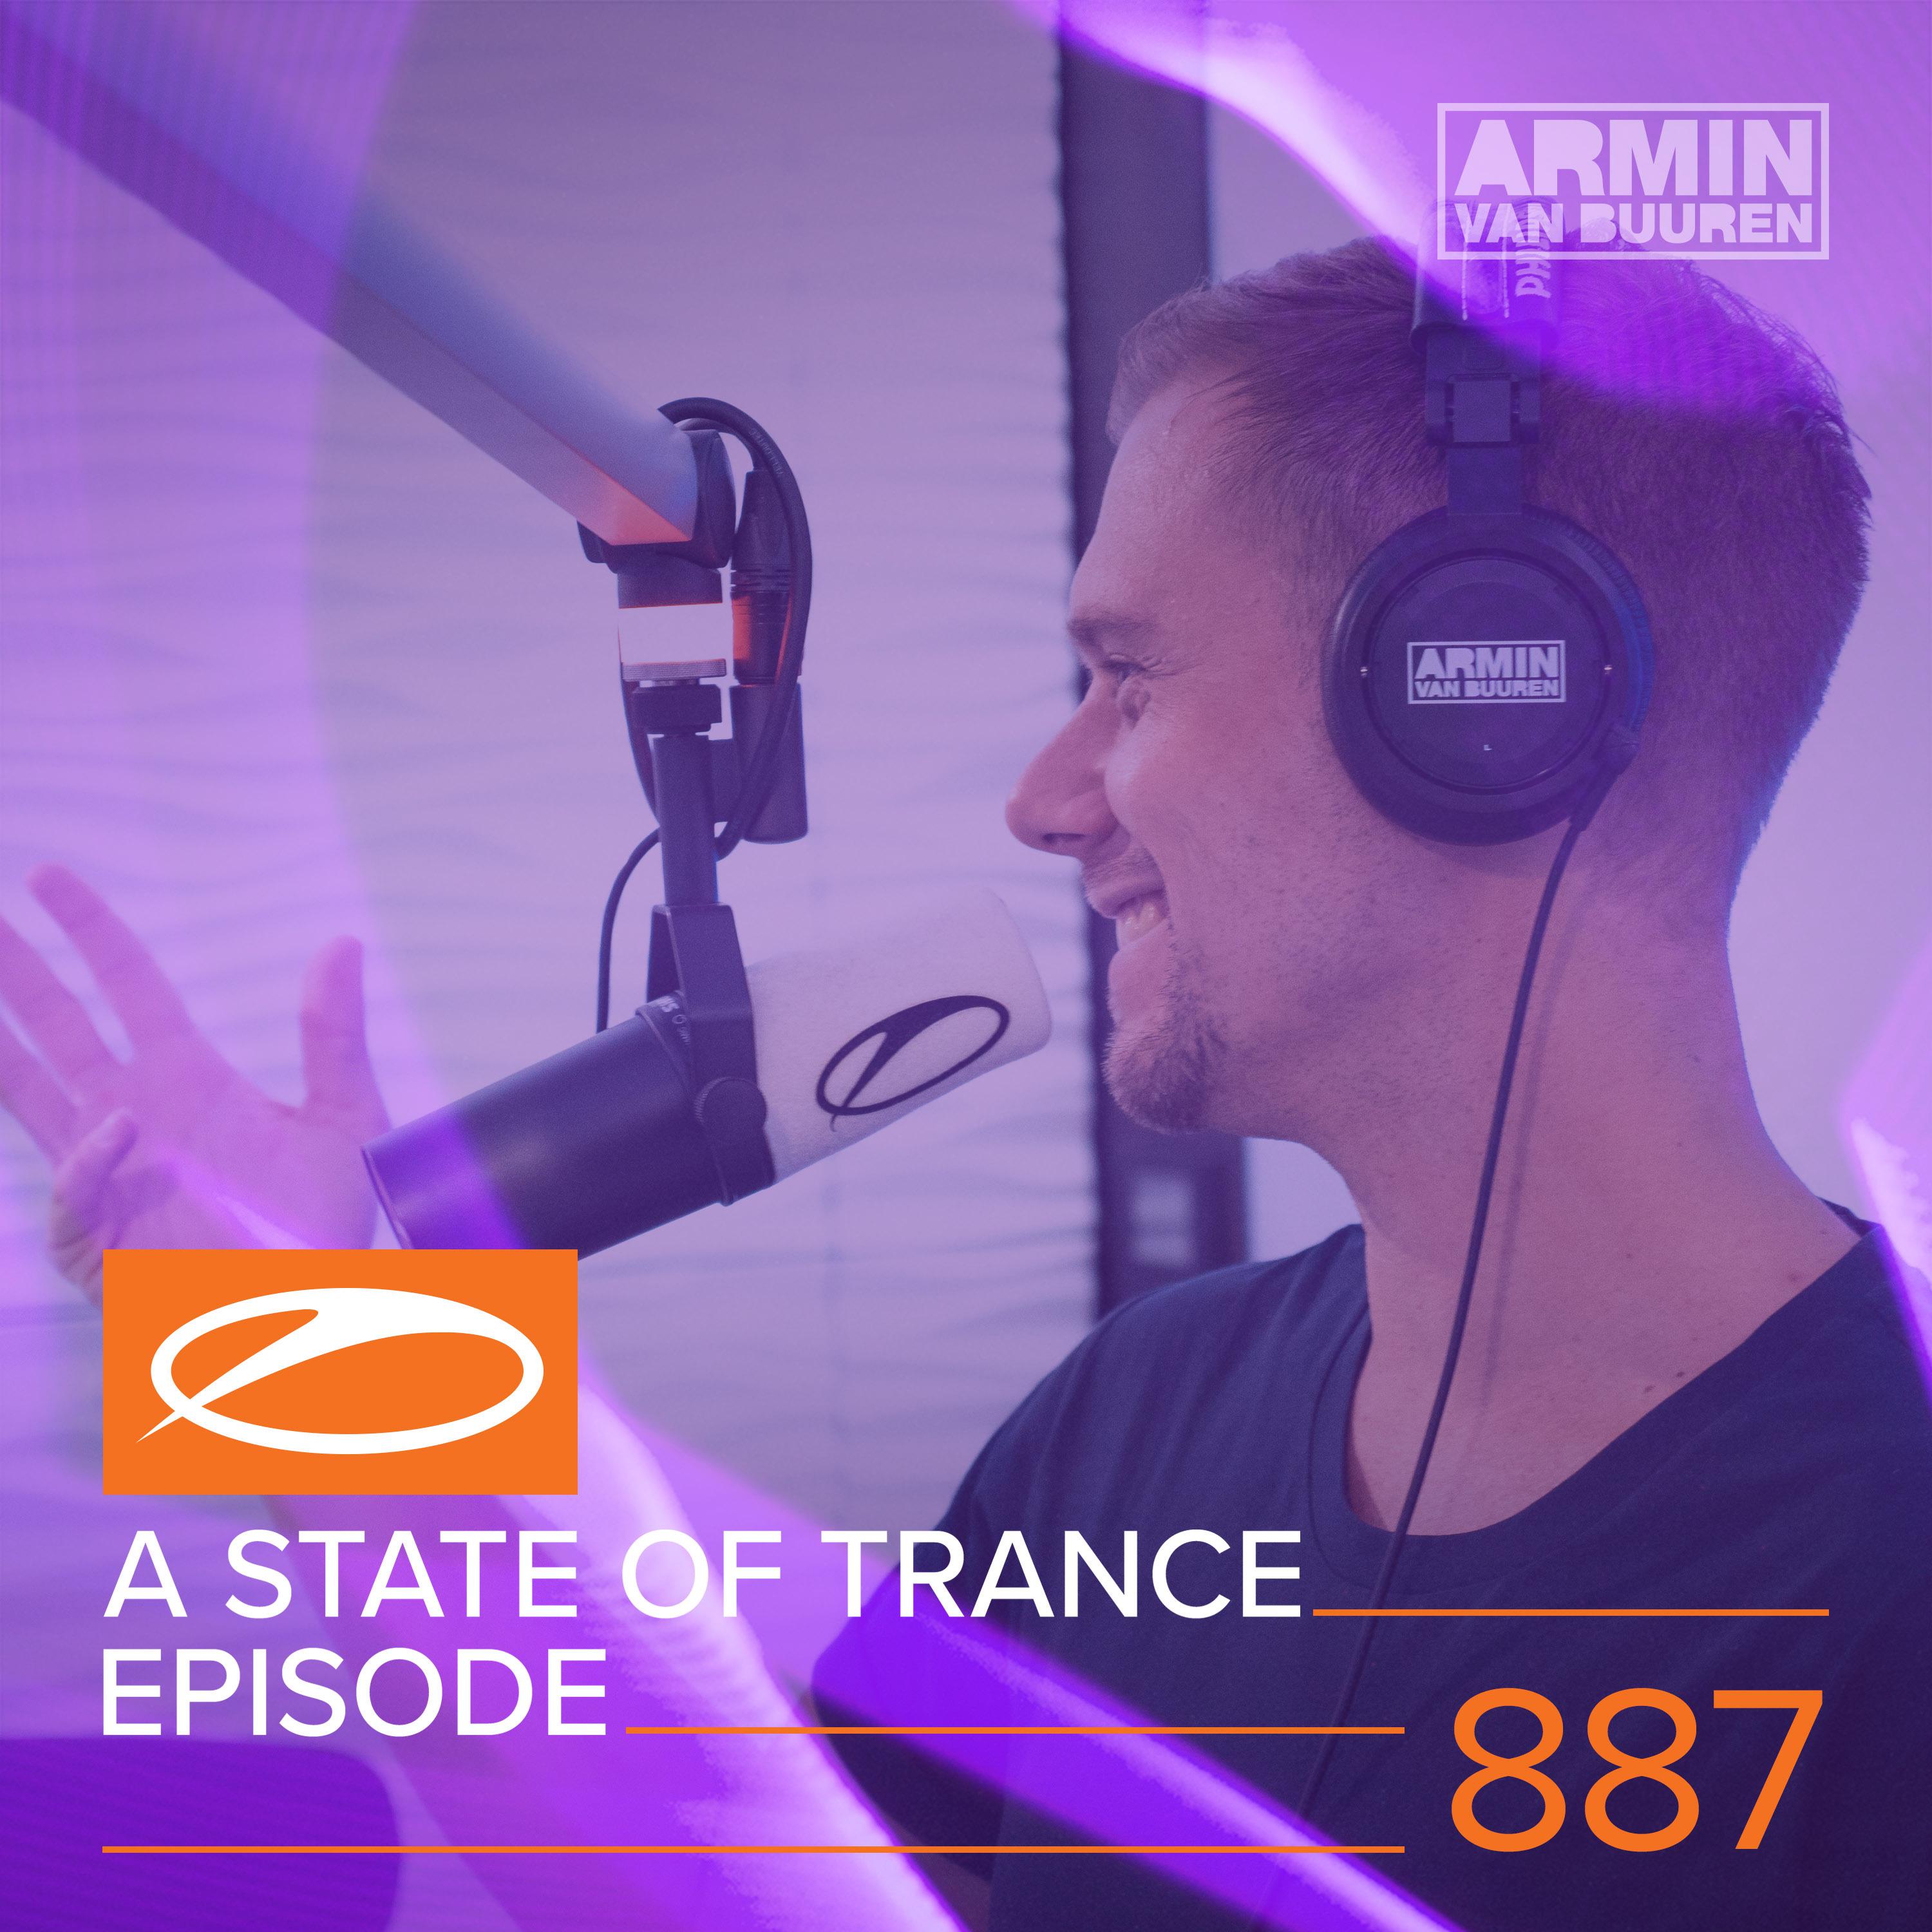 More Of Your Love (ASOT 887)